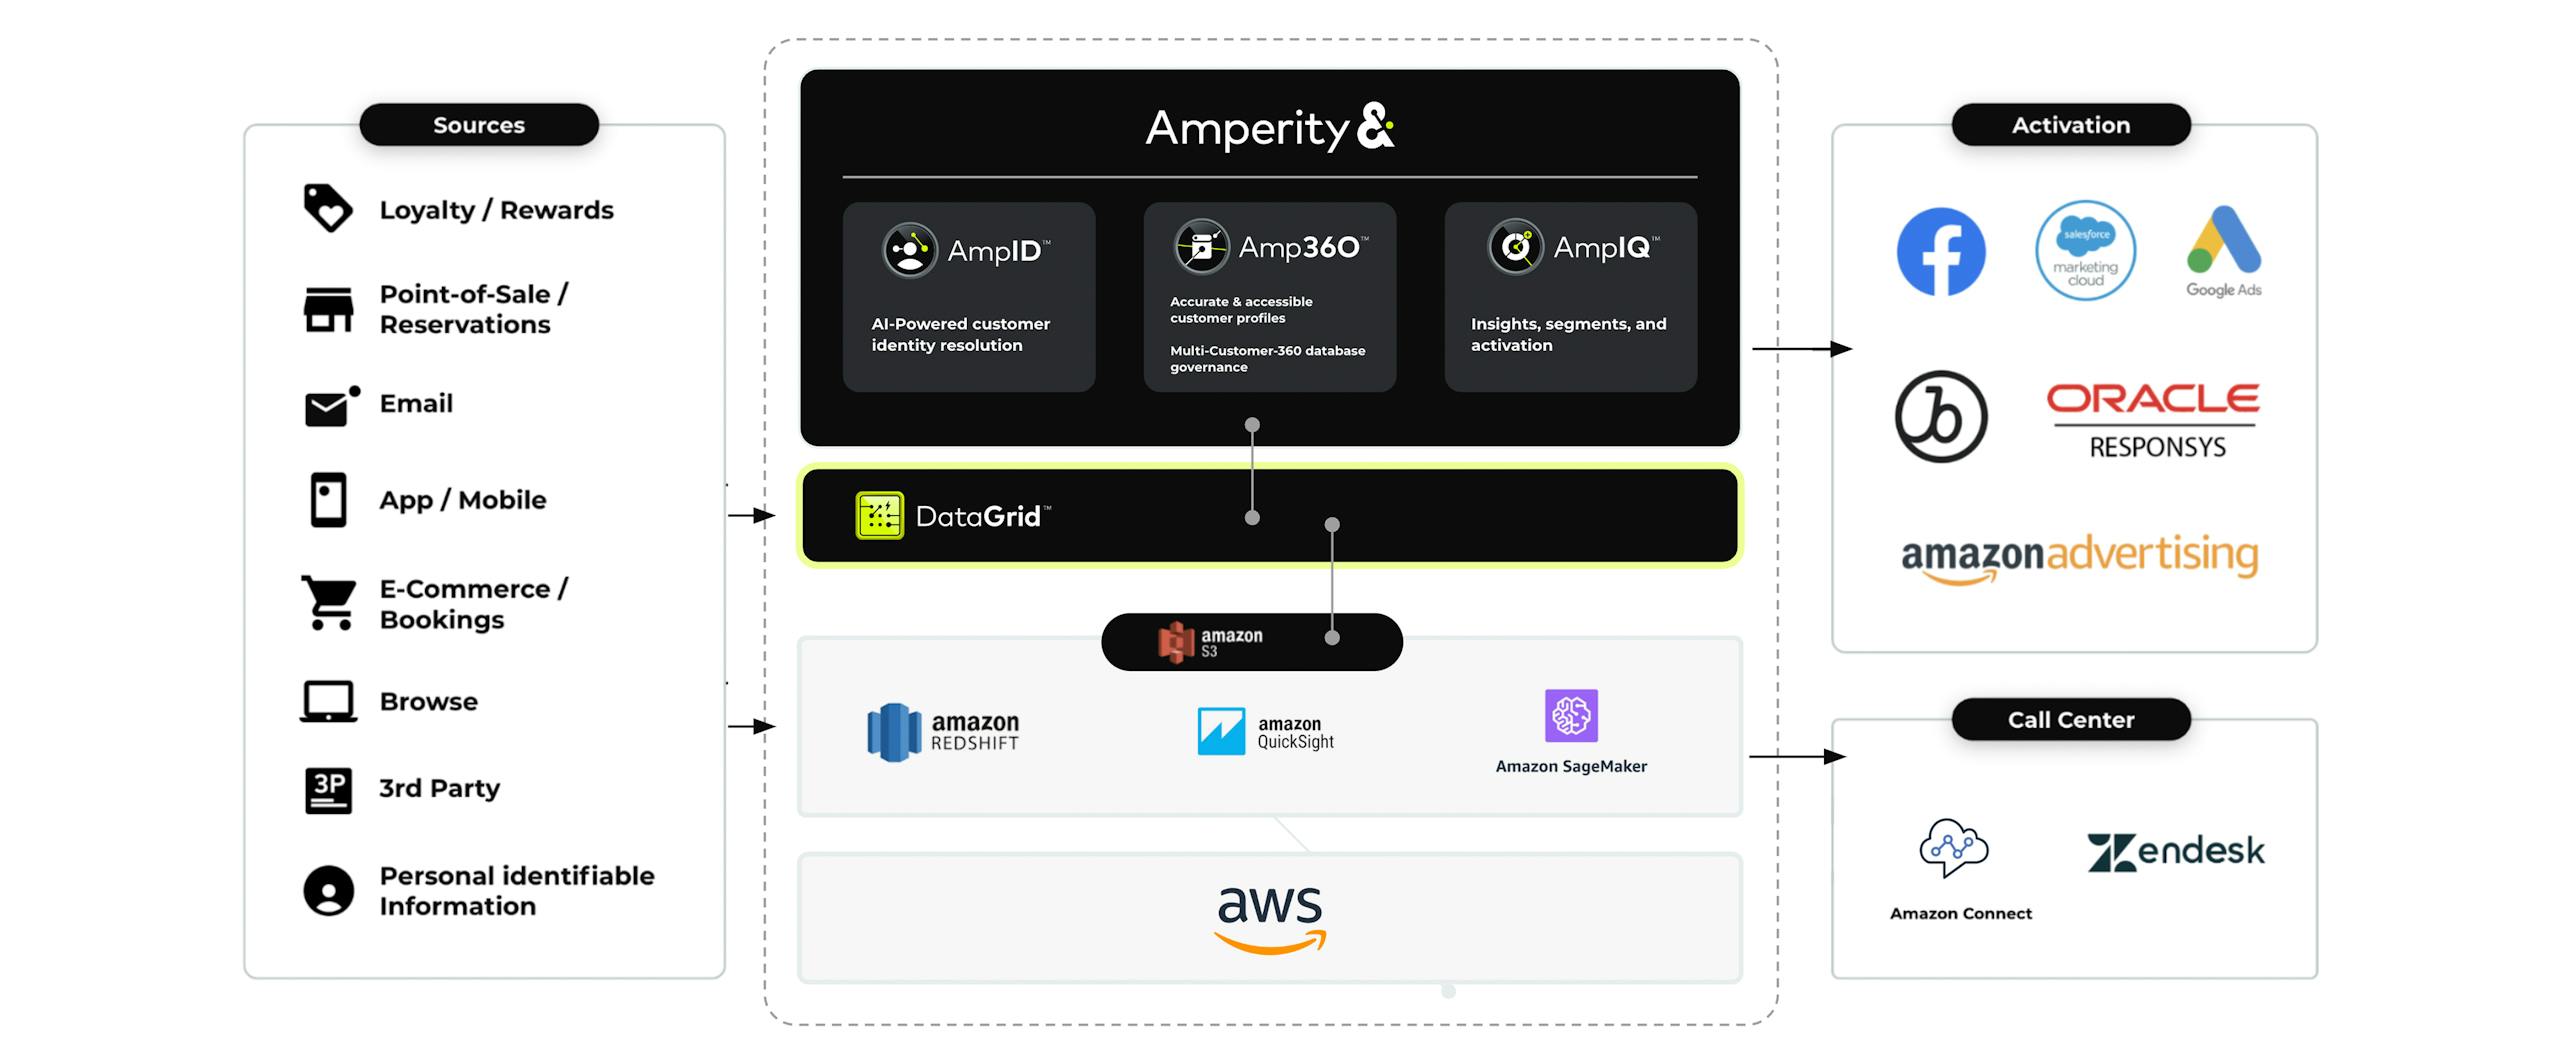 Diagram showing how AWS works with the Amperity platform